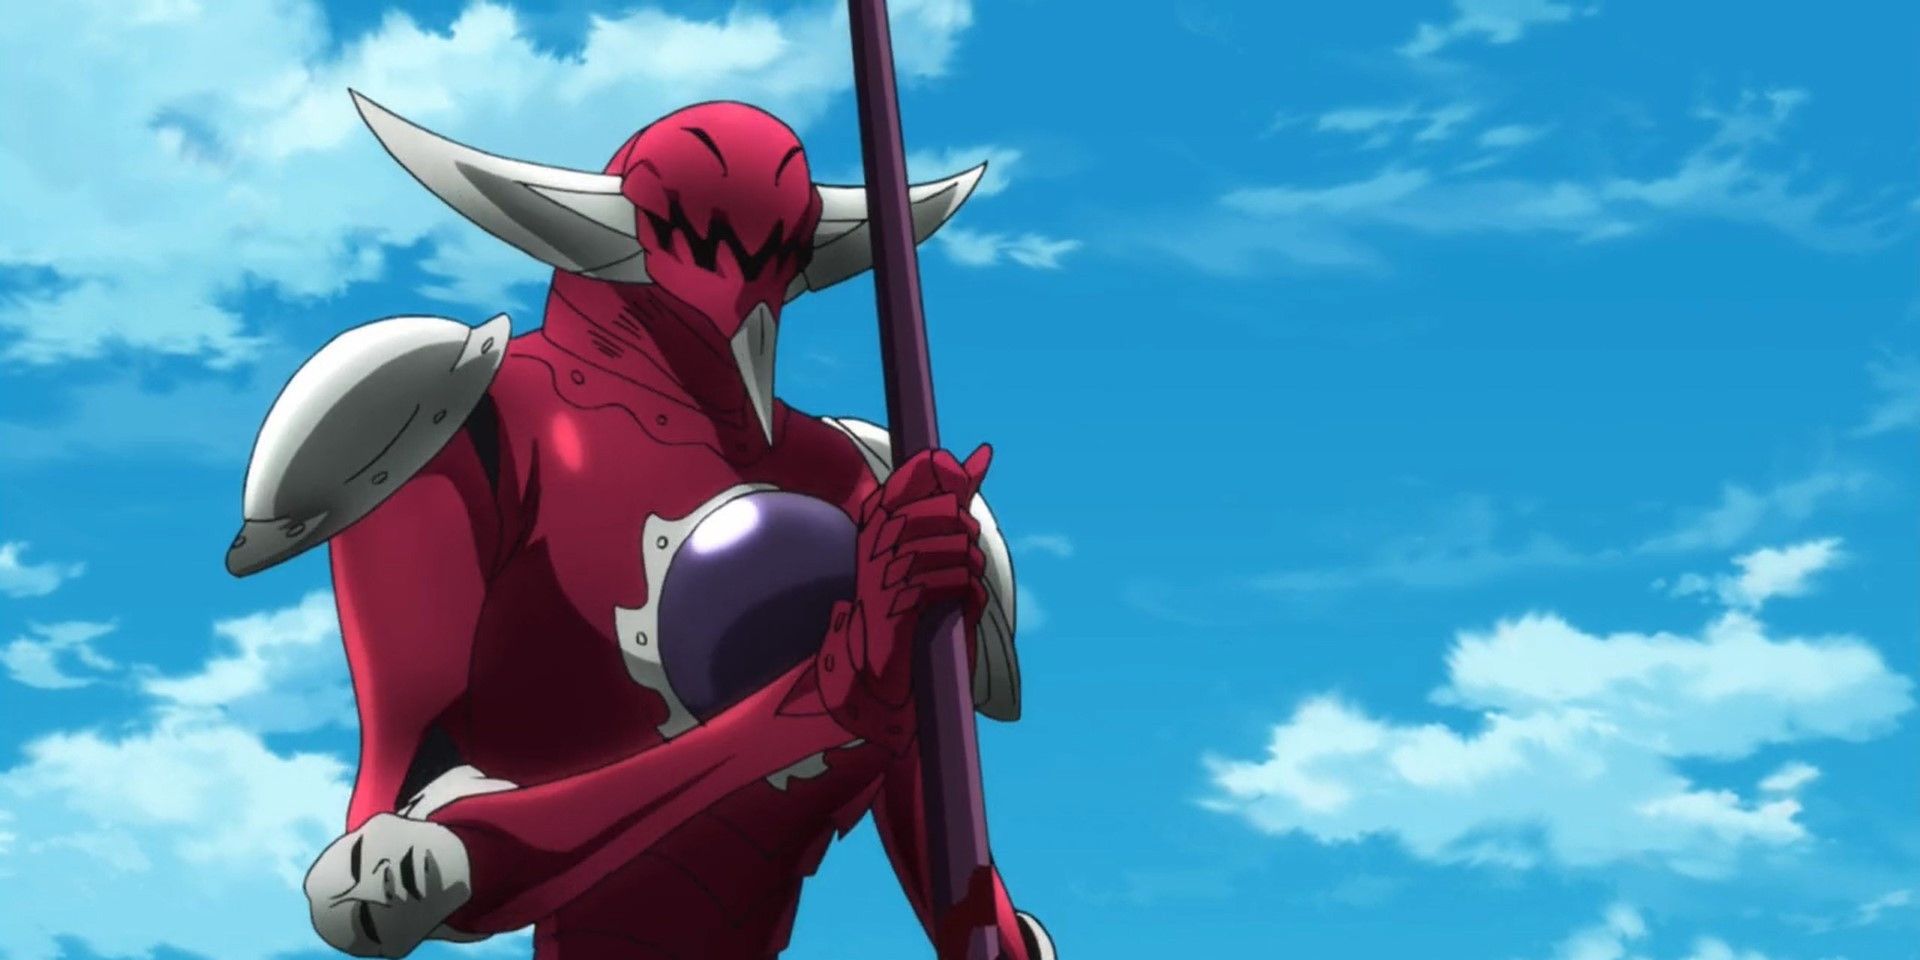 Galand stands towering with a rod in his hand during The Seven Deadly Sins